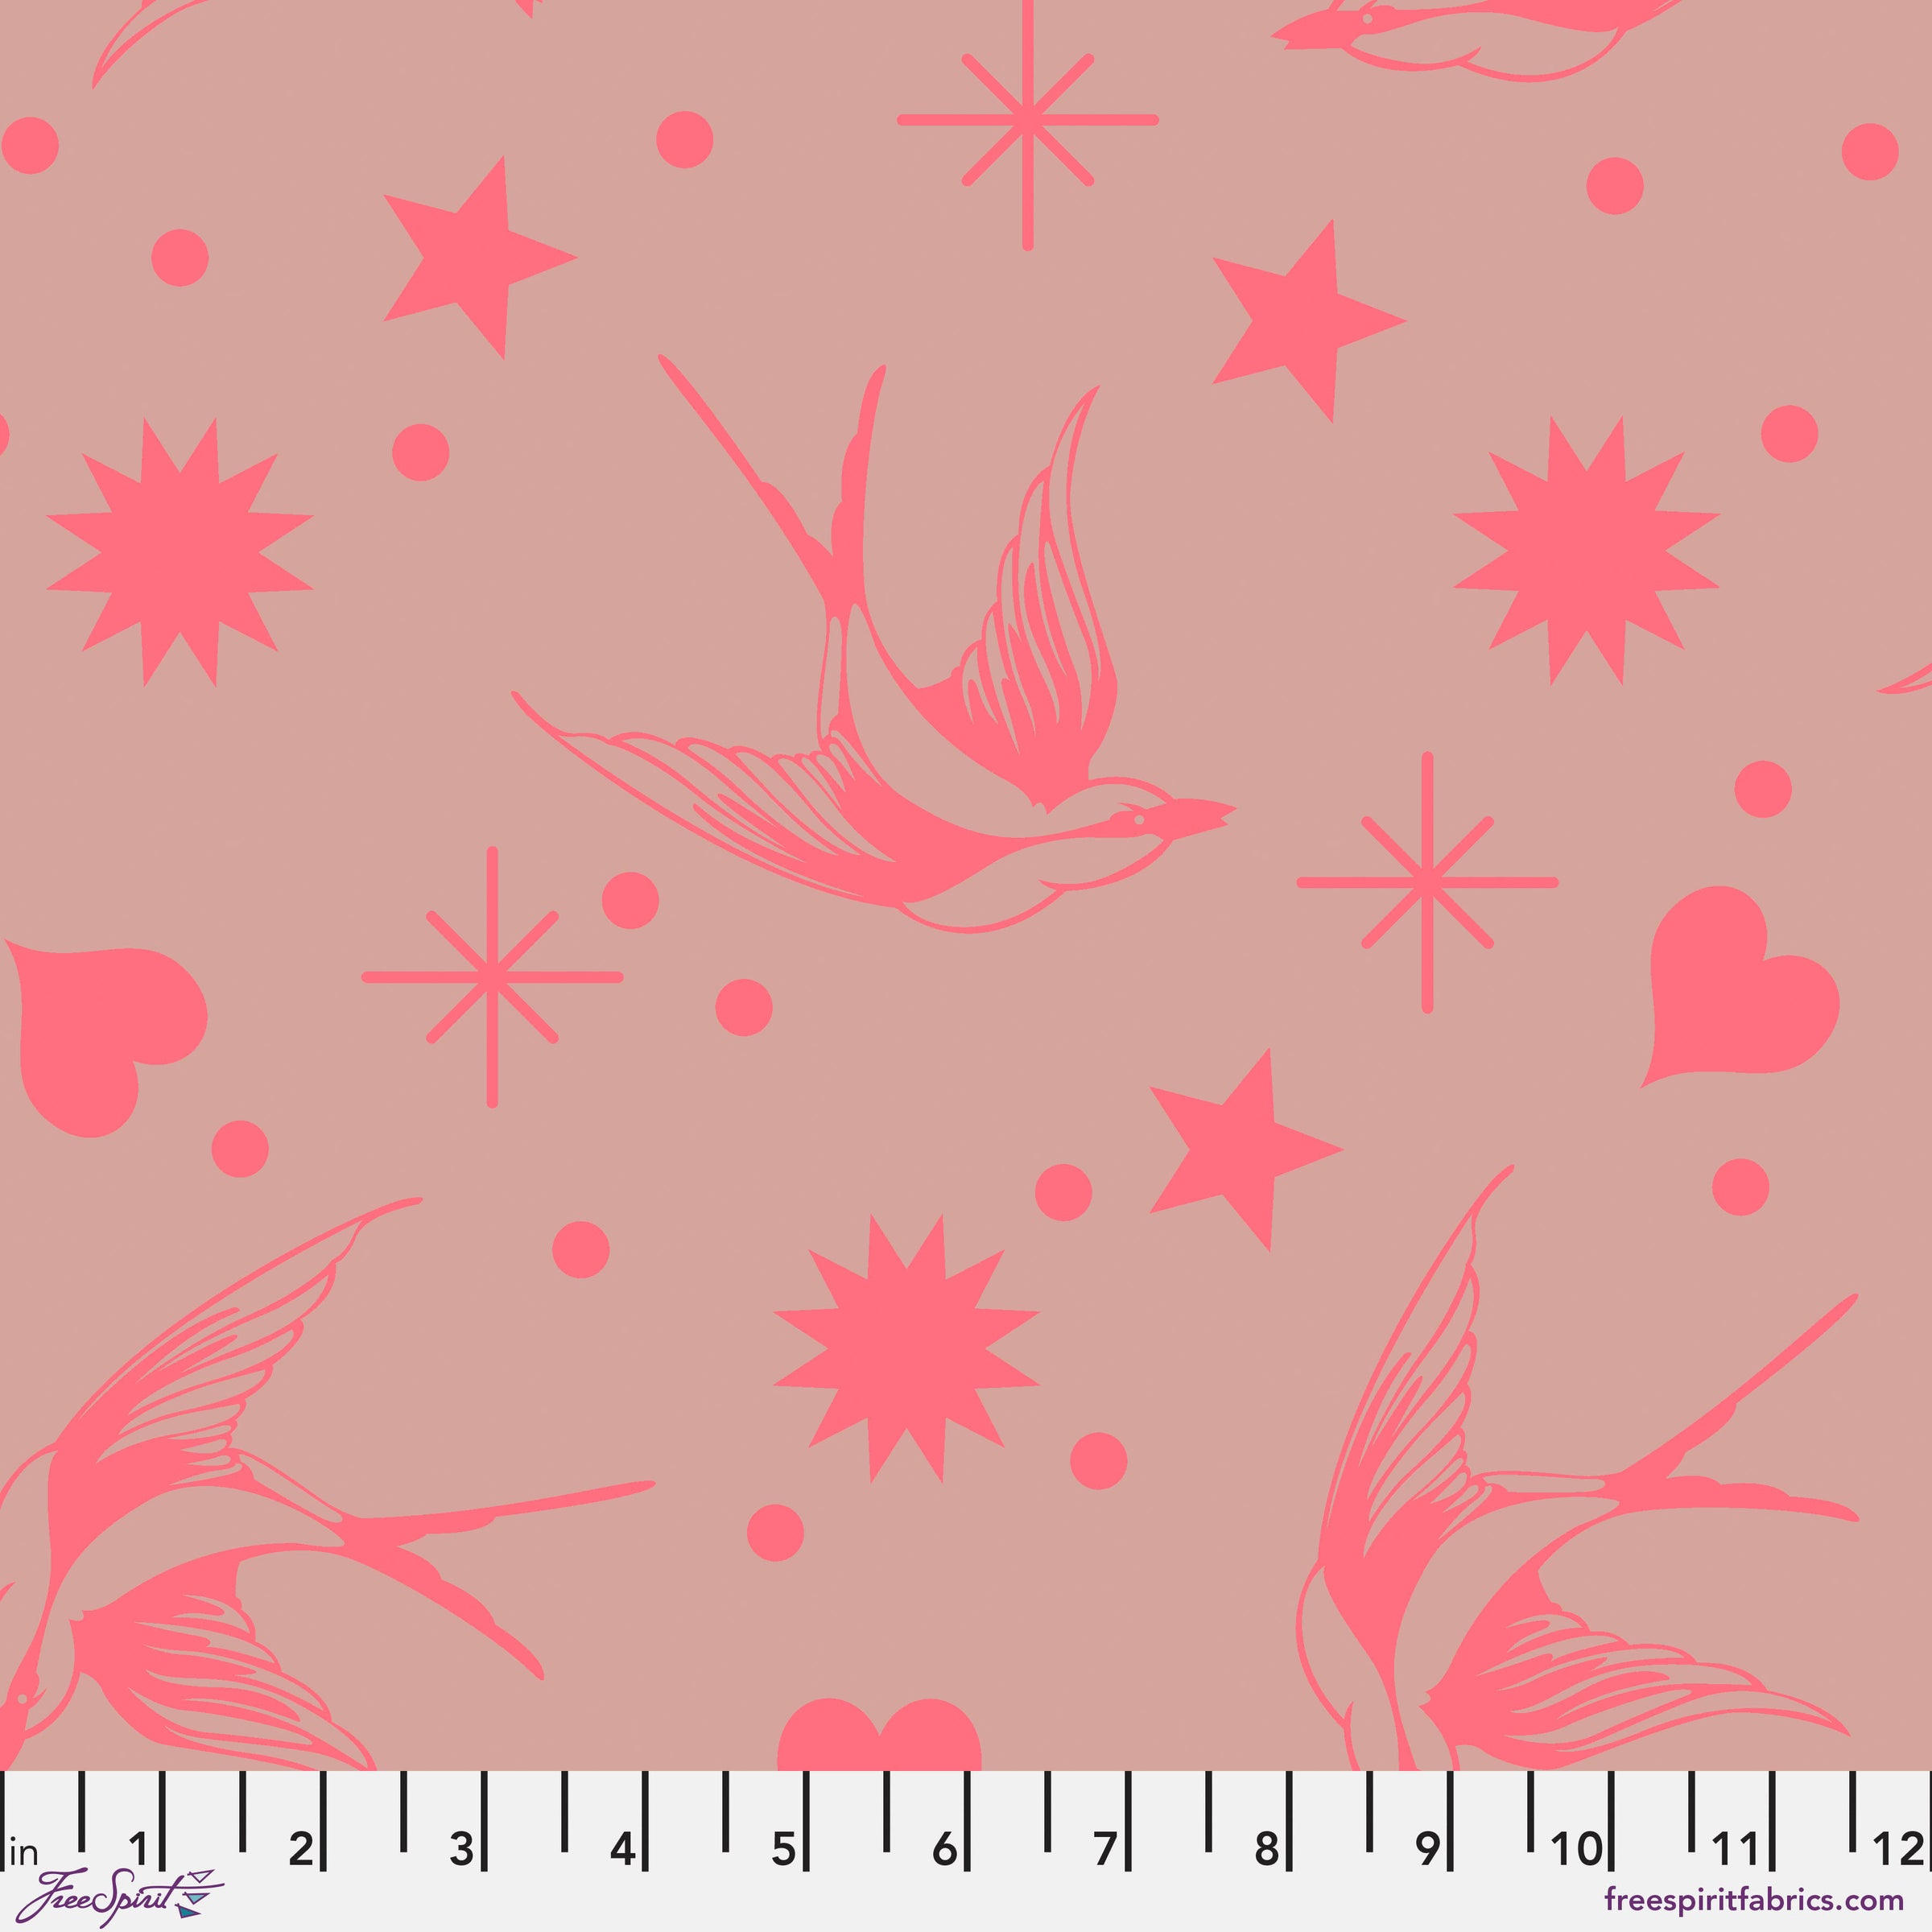 Everglow Quilt Fabric by Tula Pink - Neon Fairy Flakes in Nova Pink - PWTP157.NOVA